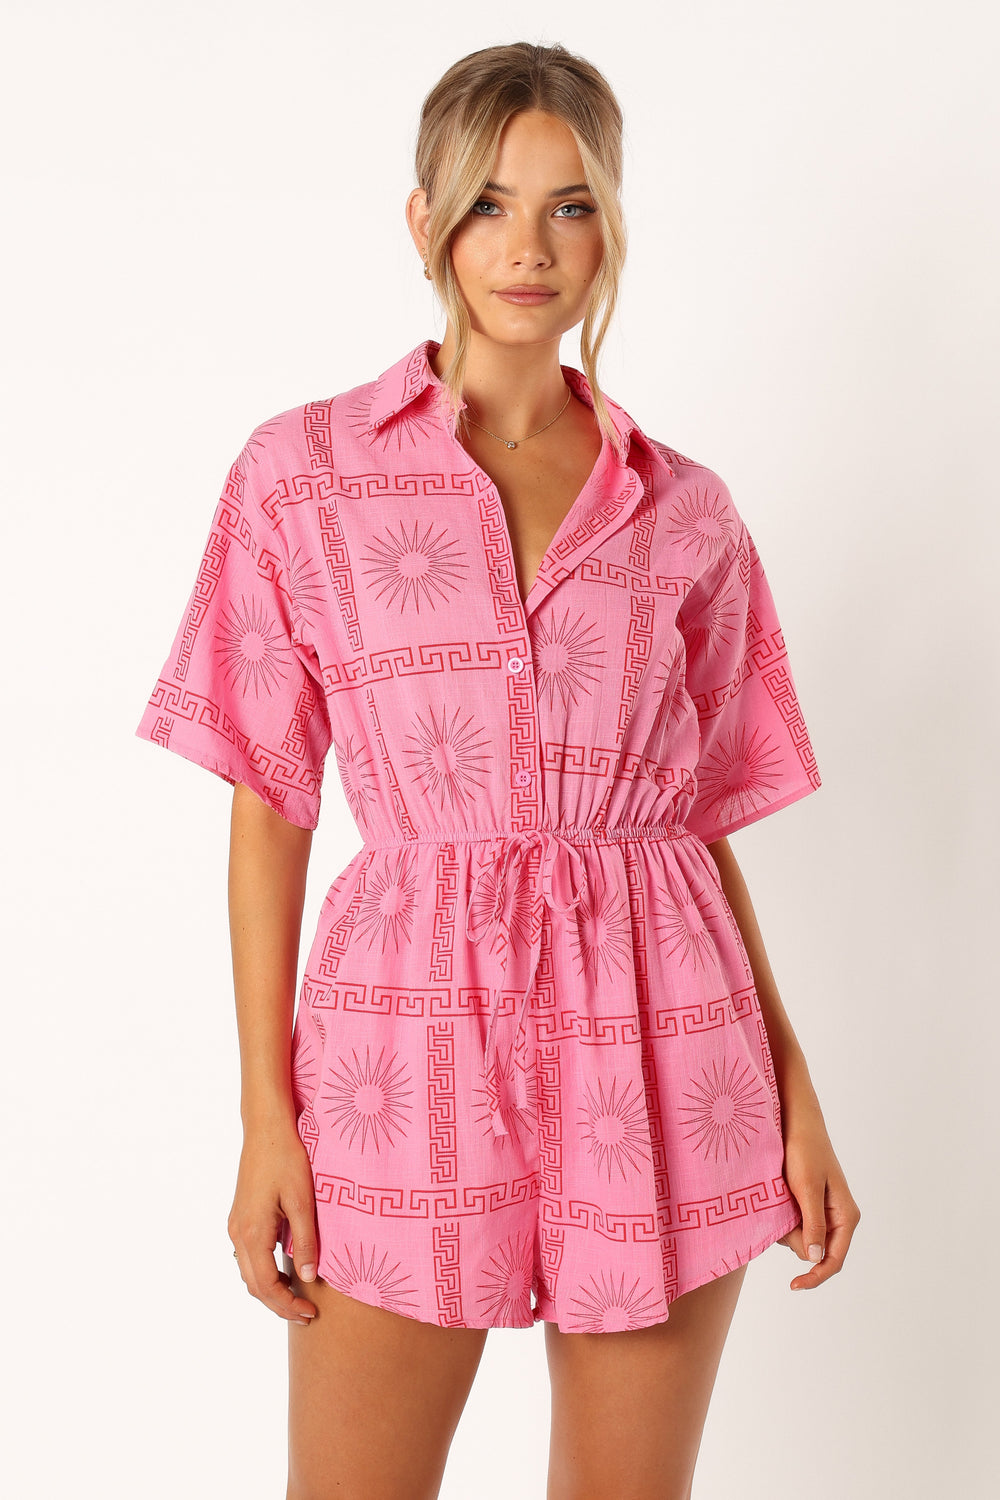 Petal and Pup USA Rompers Ilios Romper - Pink Print